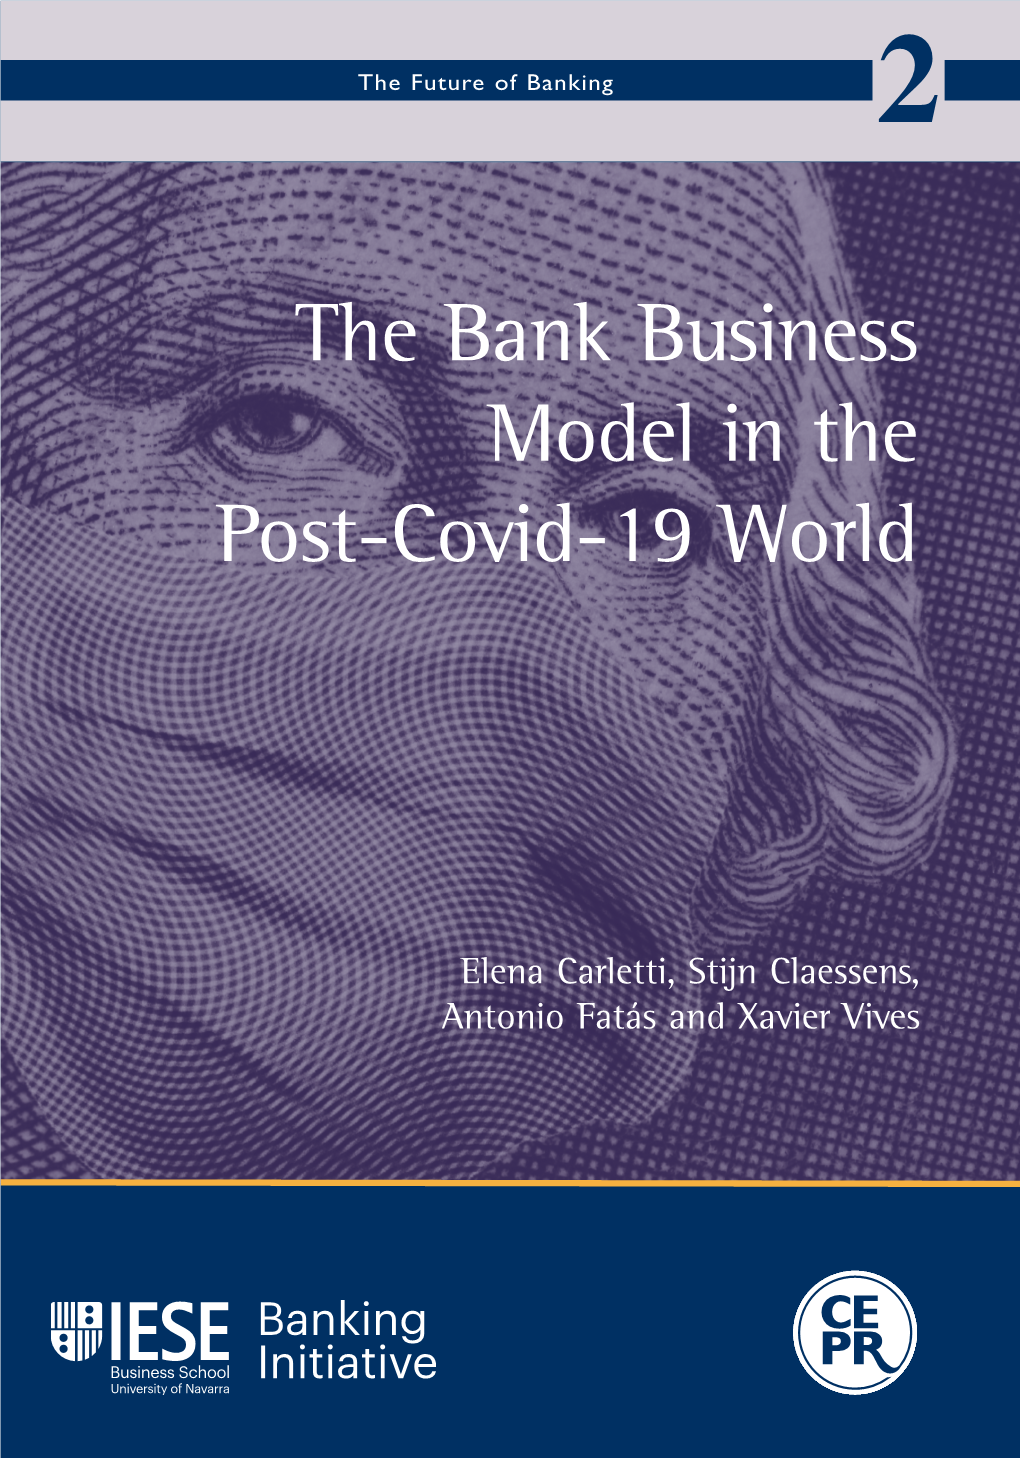 The Bank Business Model in the Post-Covid-19 World the Future of Banking 2 the Covid-19 Pandemic Has Induced a Deep Global Economic Crisis